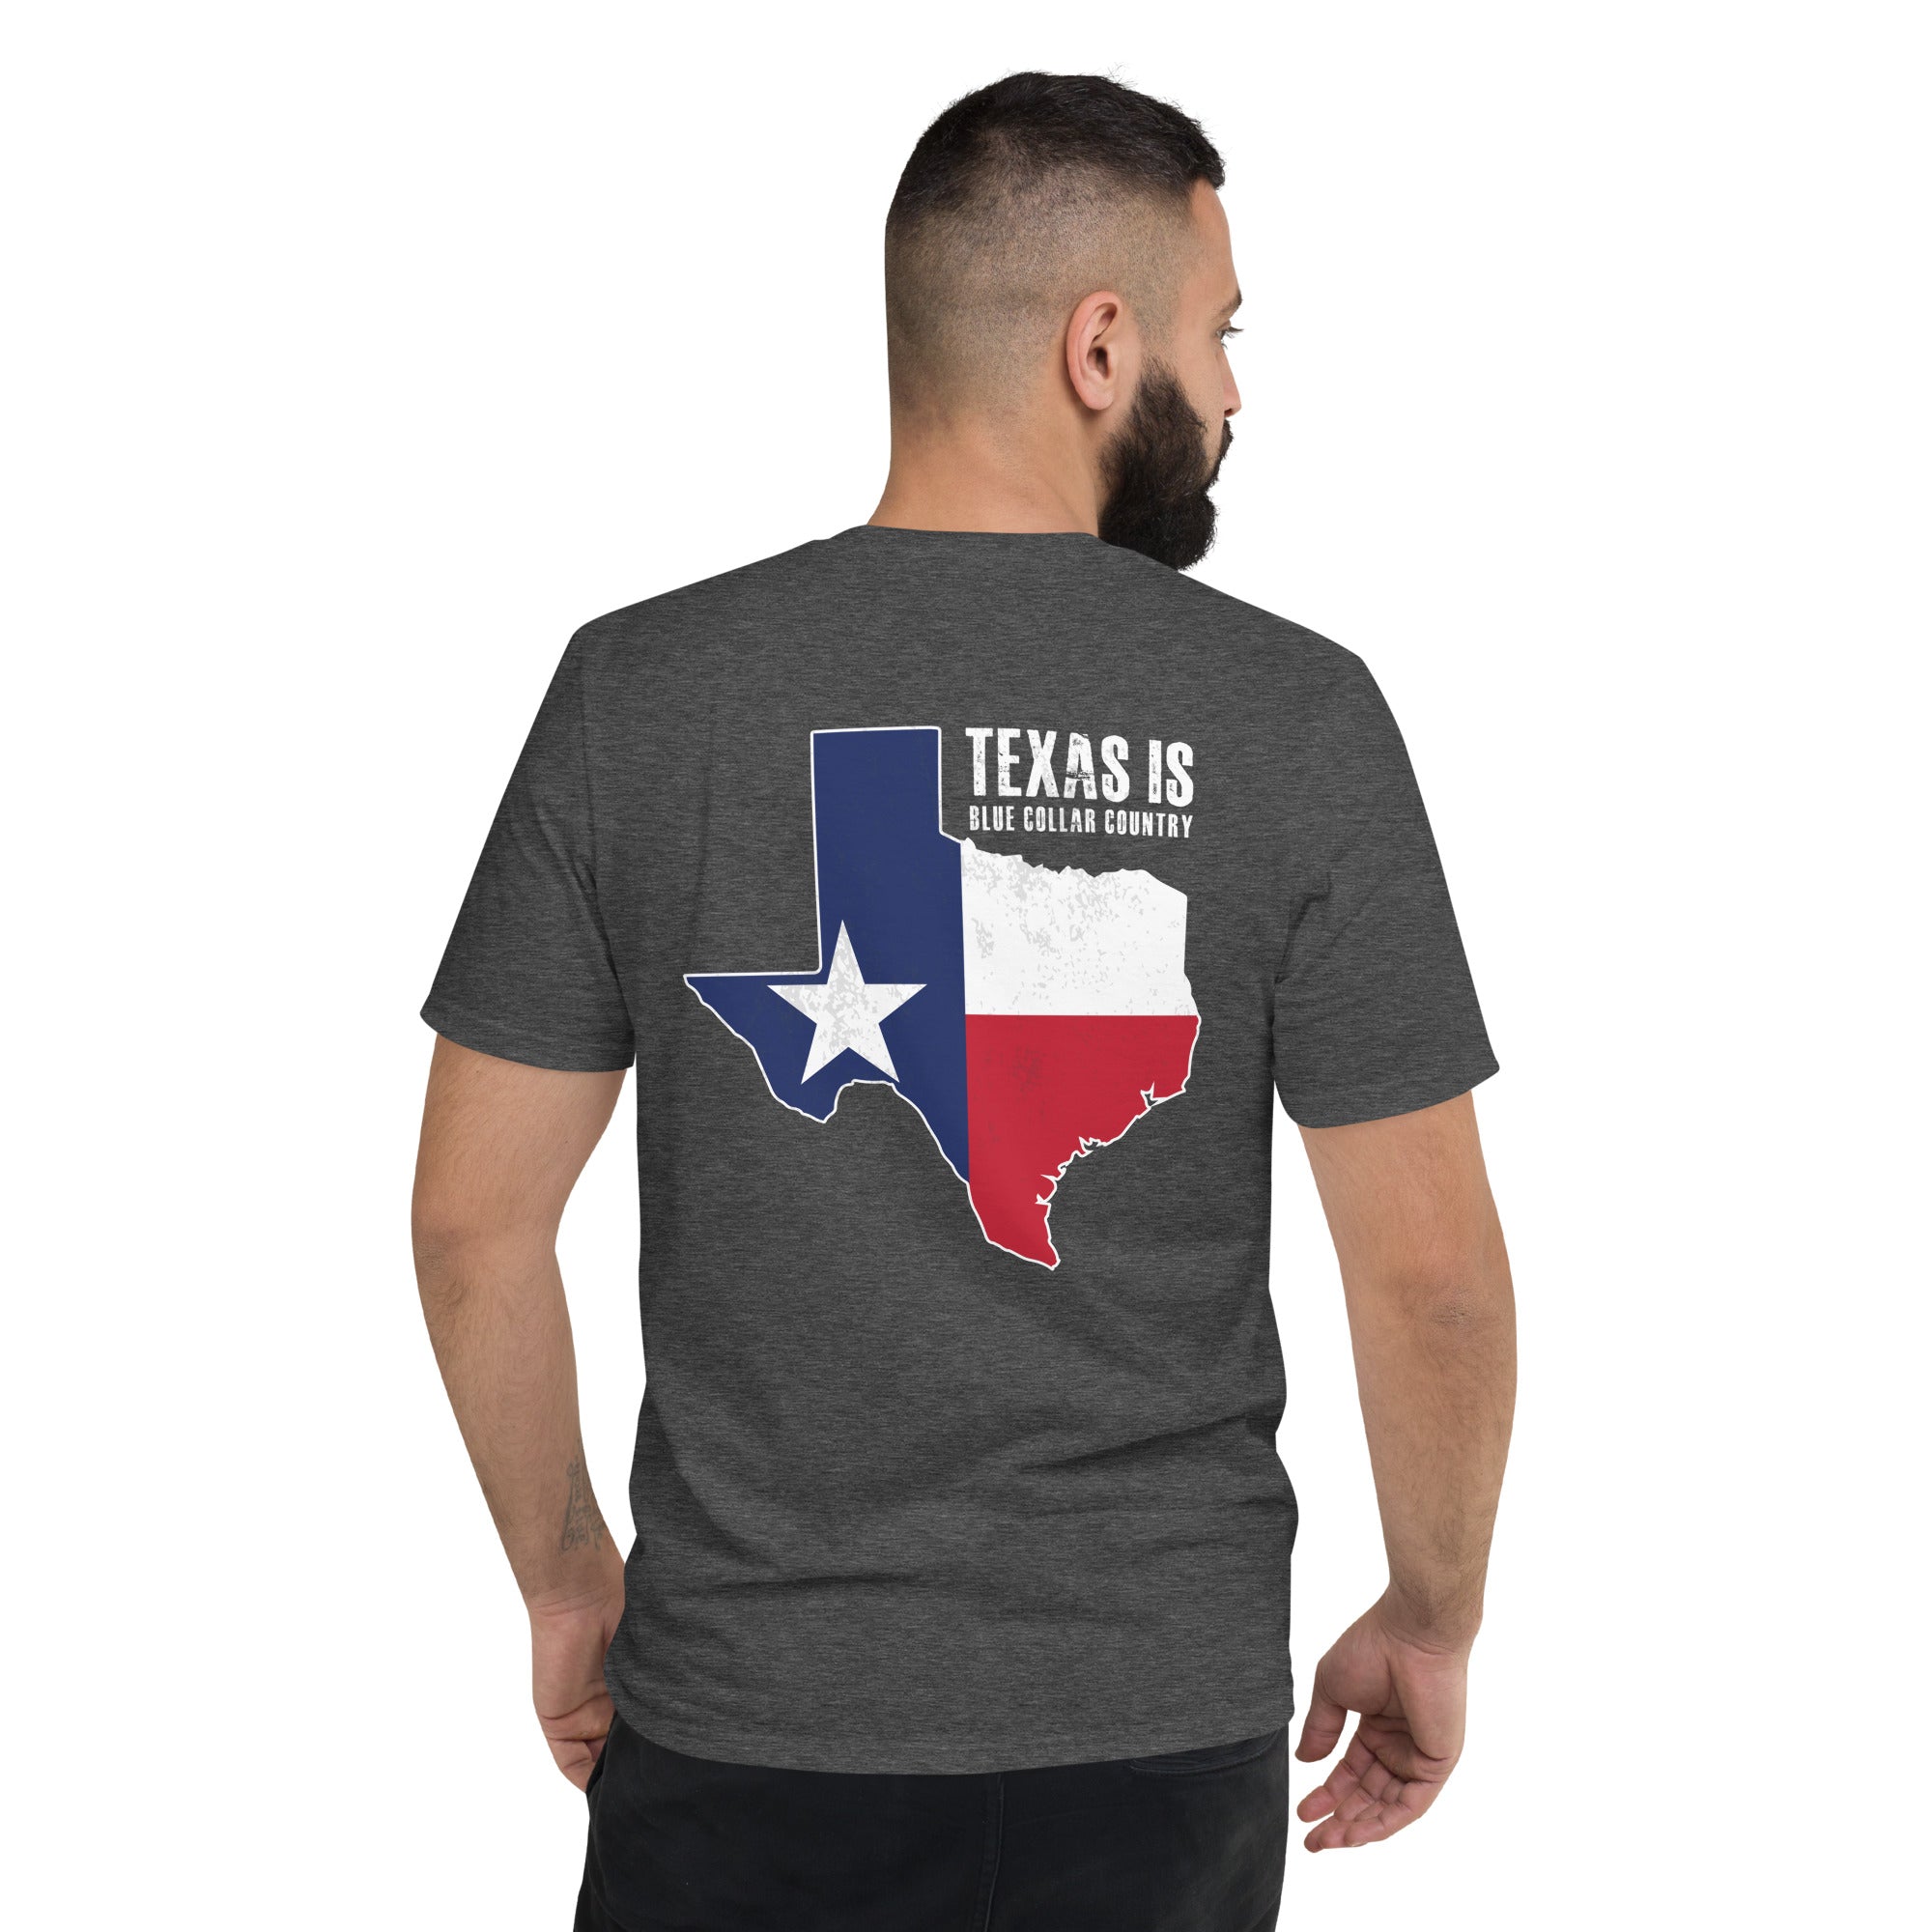 Texas is Blue Collar Country  I  Short-Sleeve T-Shirt